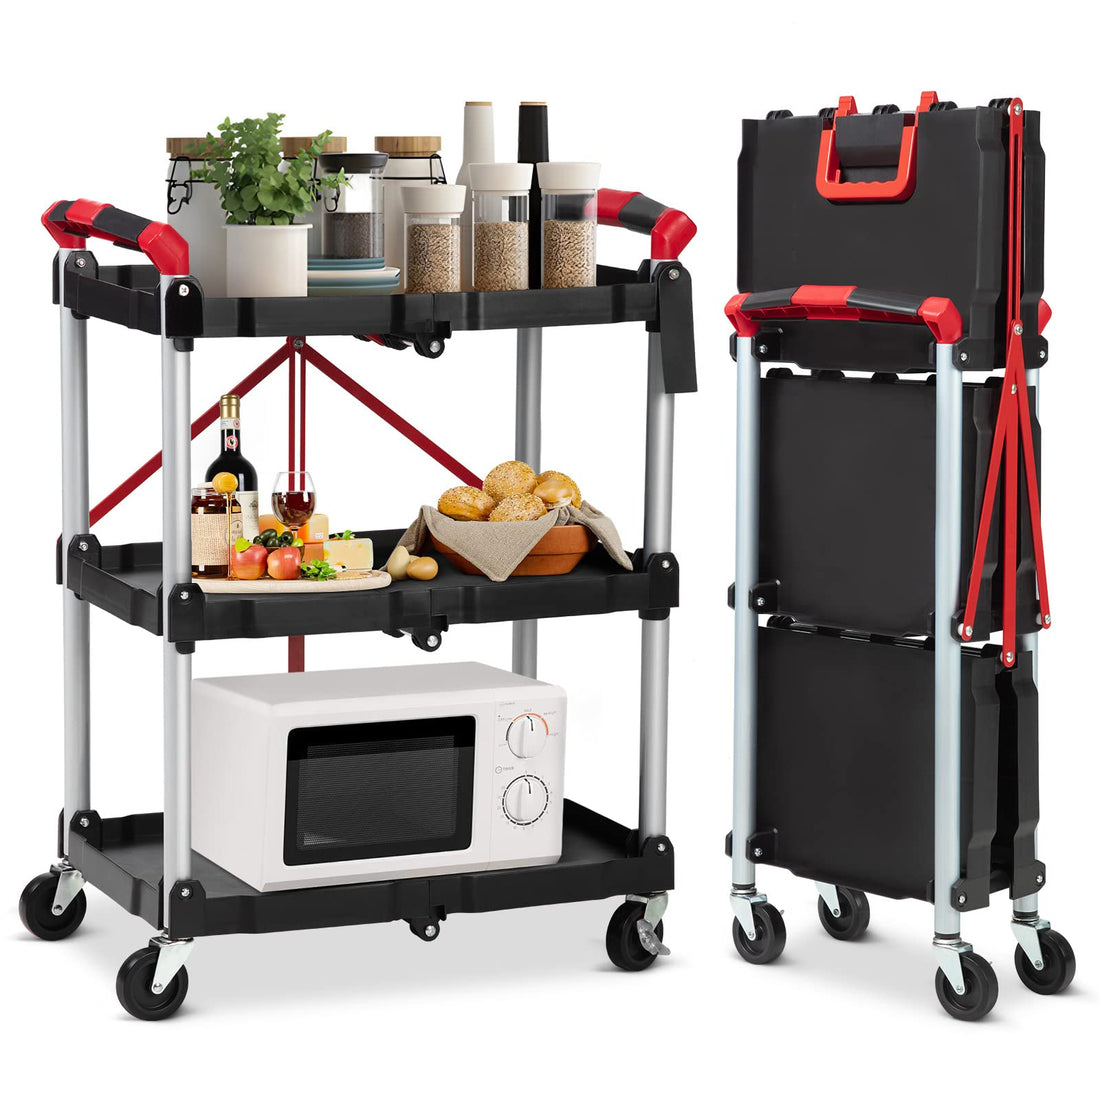 GARVEE 3 Tier Mobile Folding Trolley 56 lbs Load Capacity/Tier Portable Service Cart Collapsible Utility Cart for Office Warehouse and Home